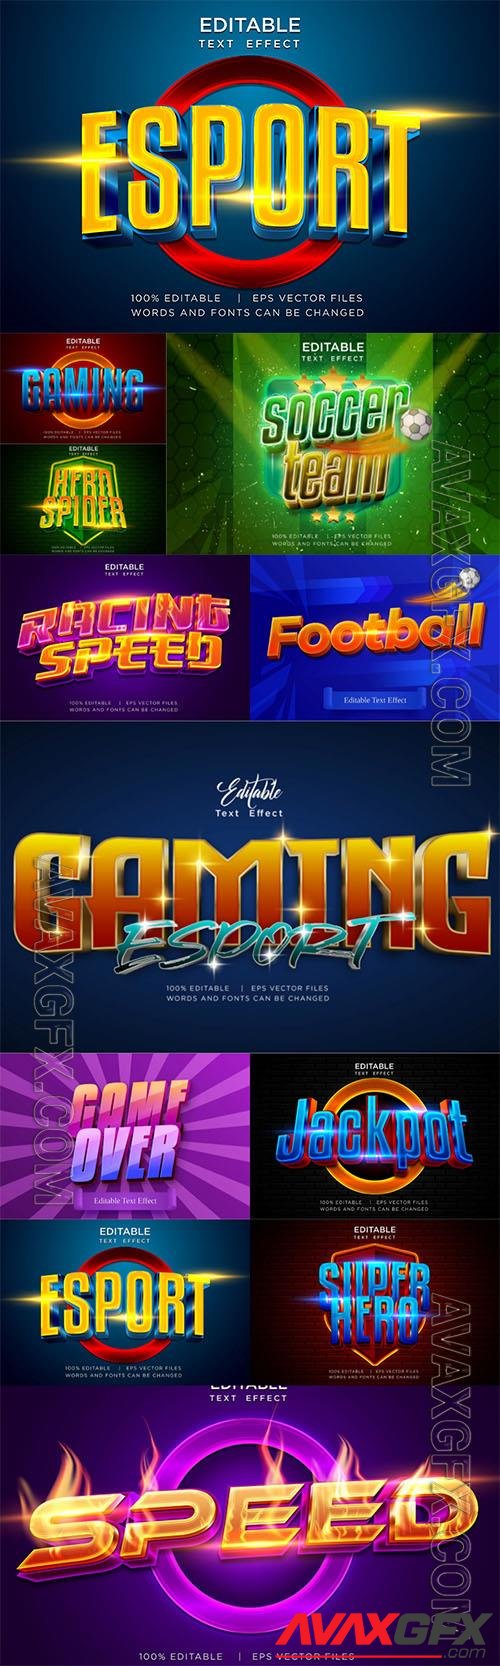 Esport gaming editable 3d text effect in vector